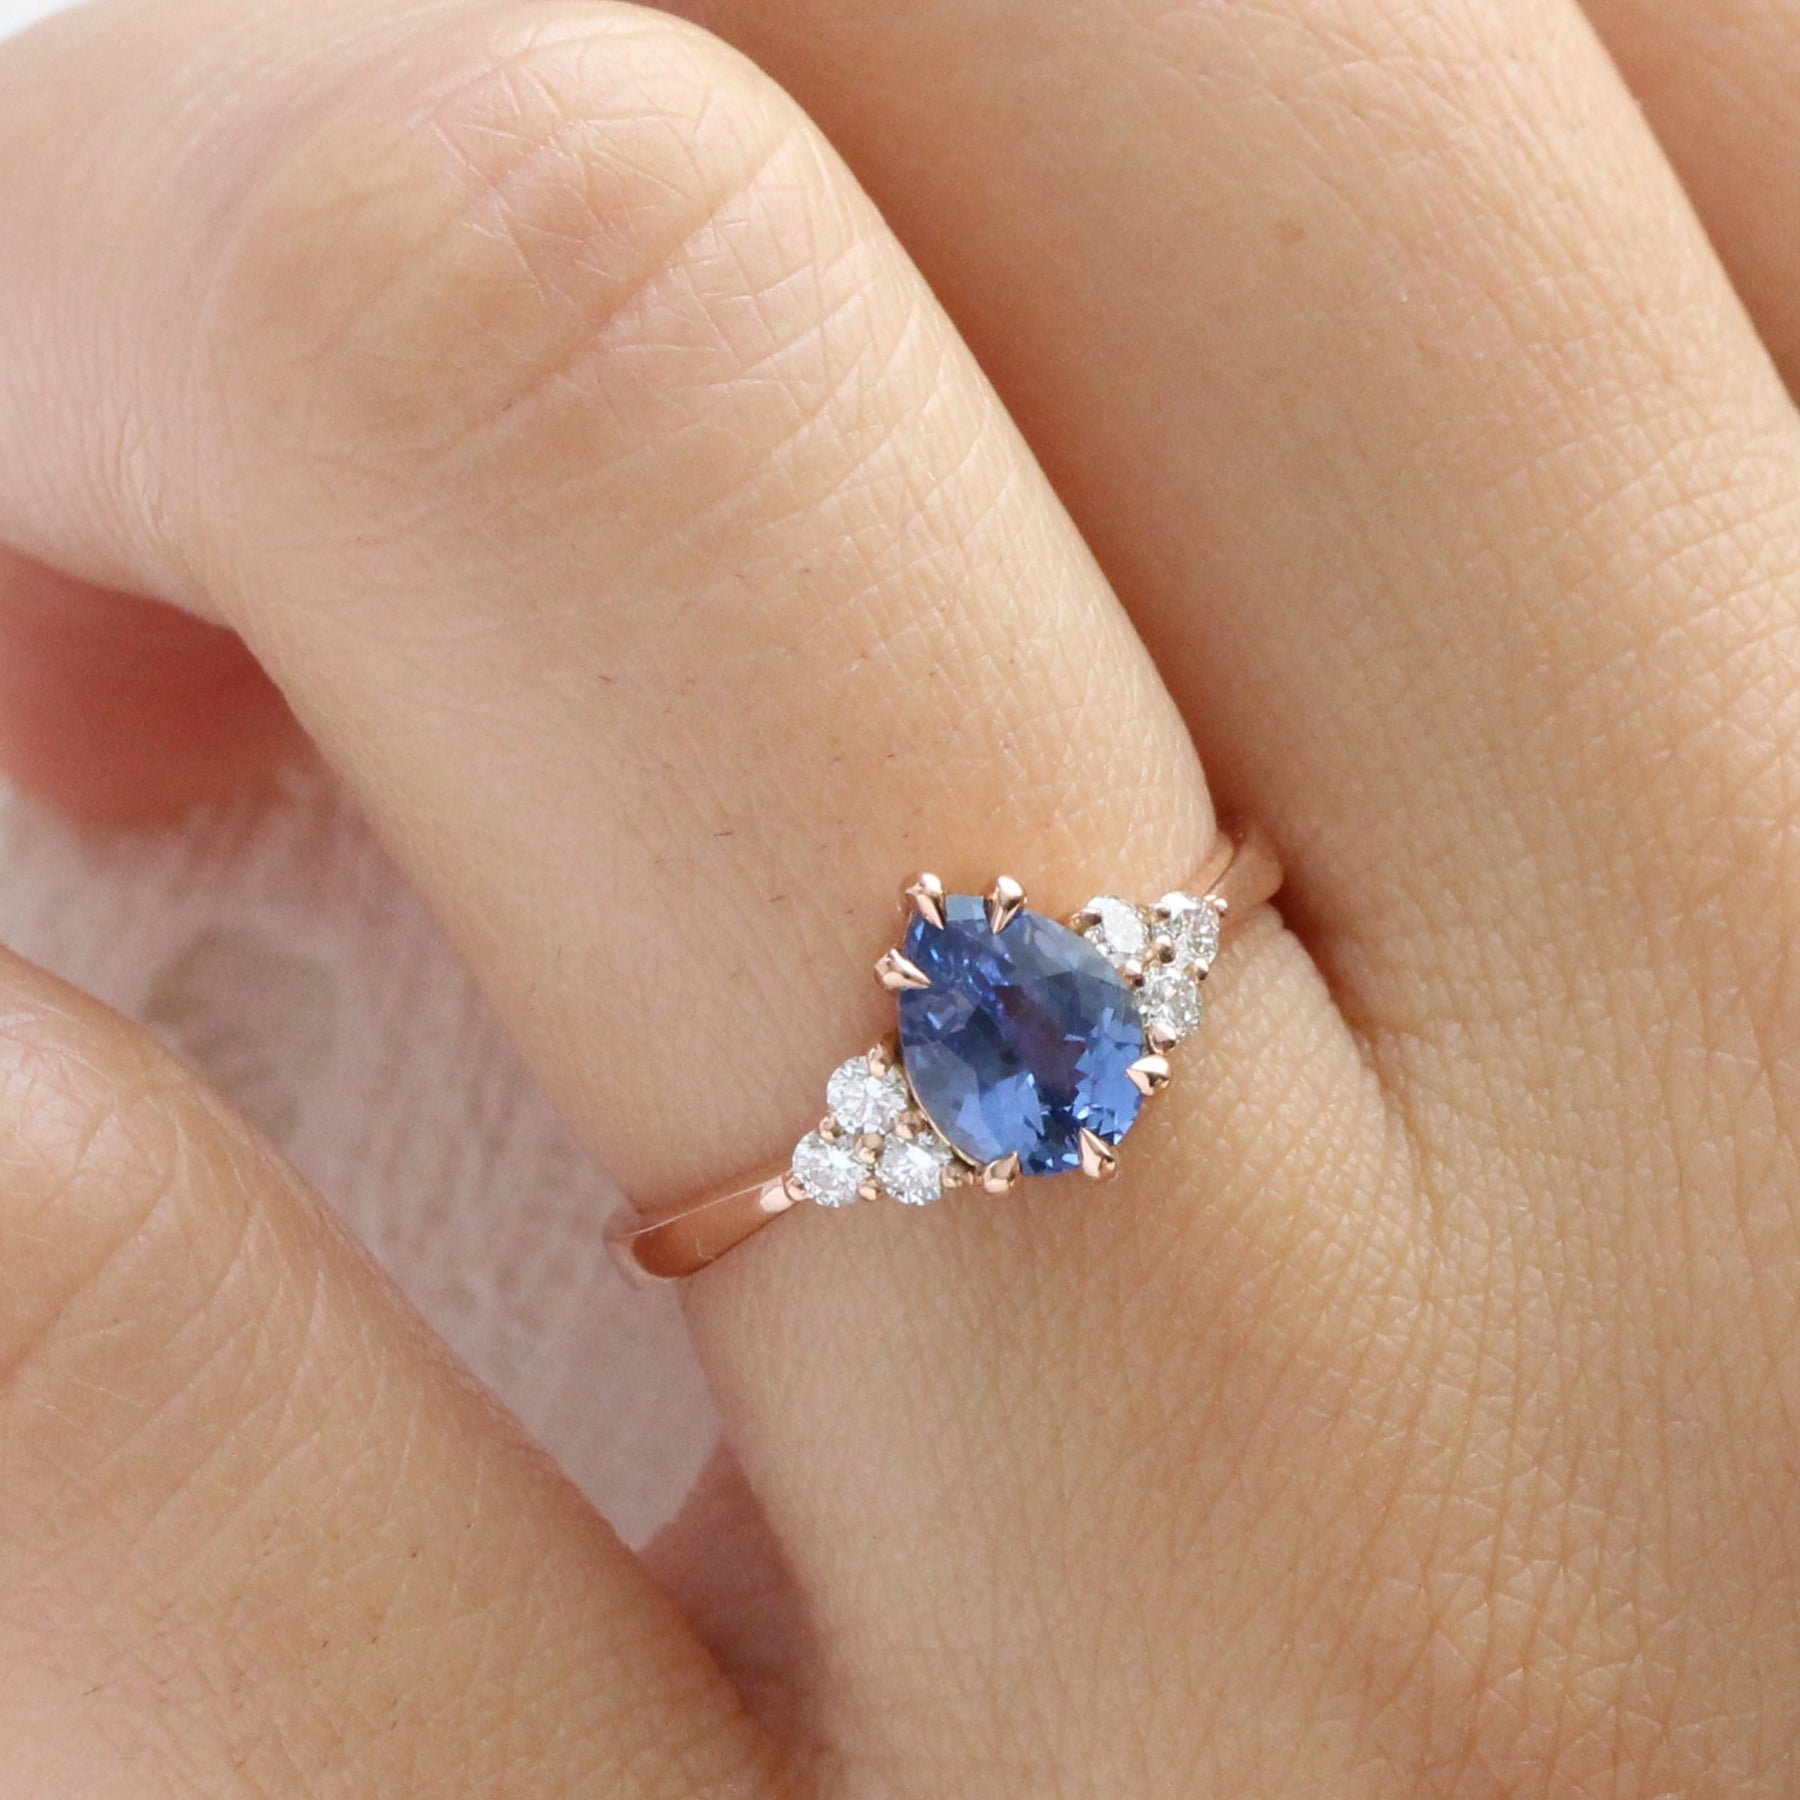 Pear blue sapphire ring rose gold 3 stone diamond ring low set engagement ring la more design jewelry